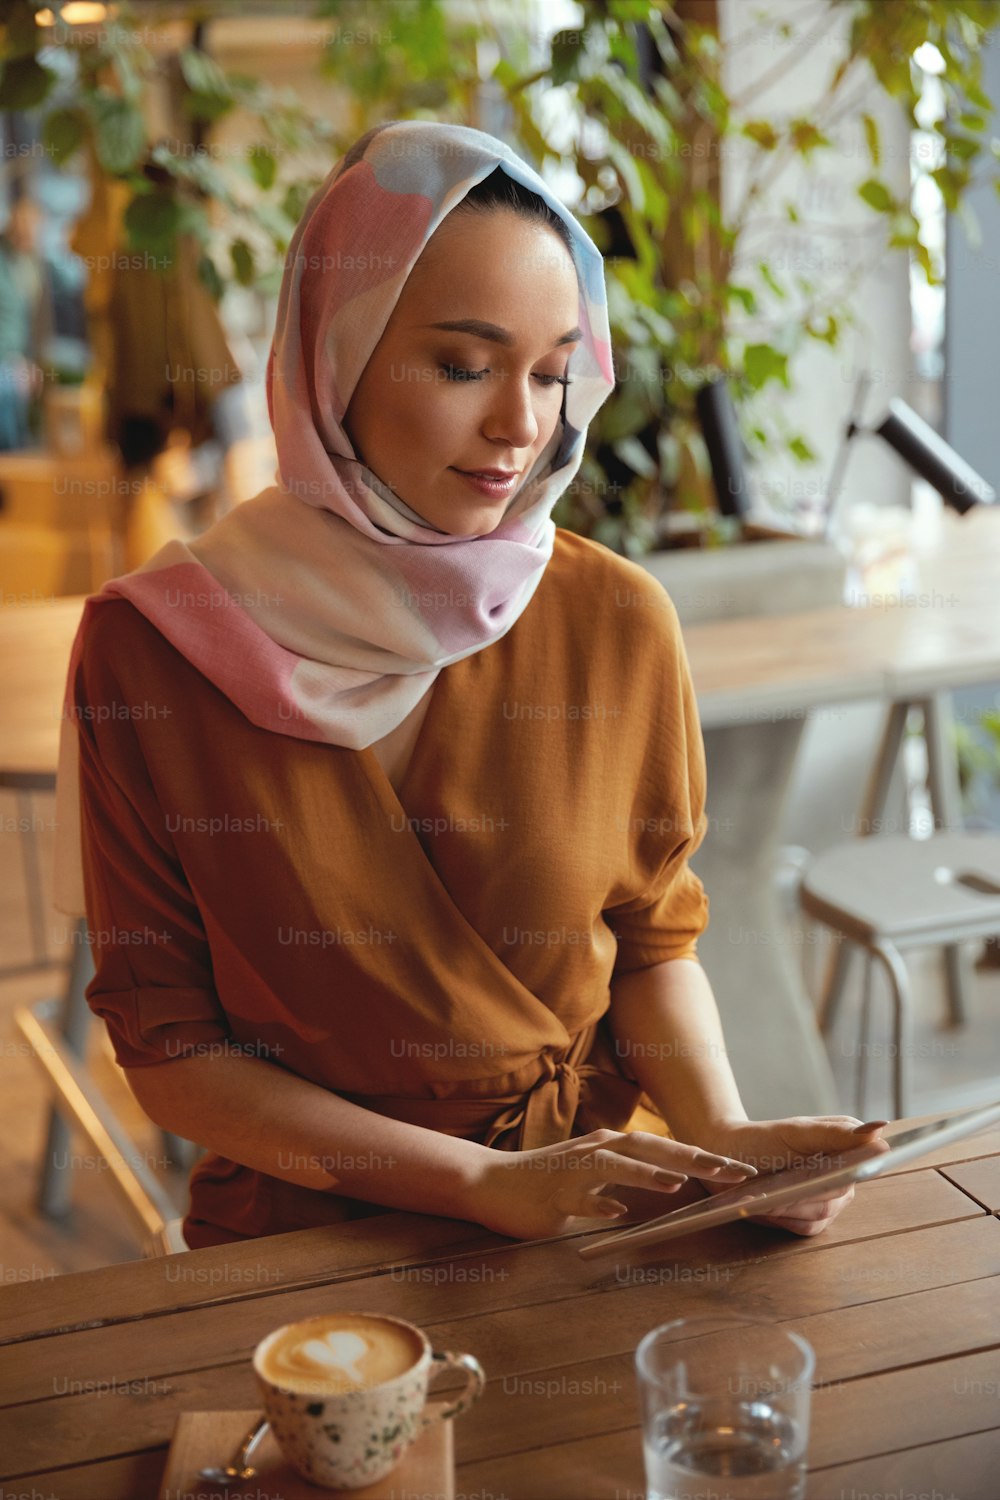 Girl In Hijab. Beautiful Muslim Woman Portrait. Female Sitting In Cafe And Working On Tablet. Model Looking At Screen And Reading.